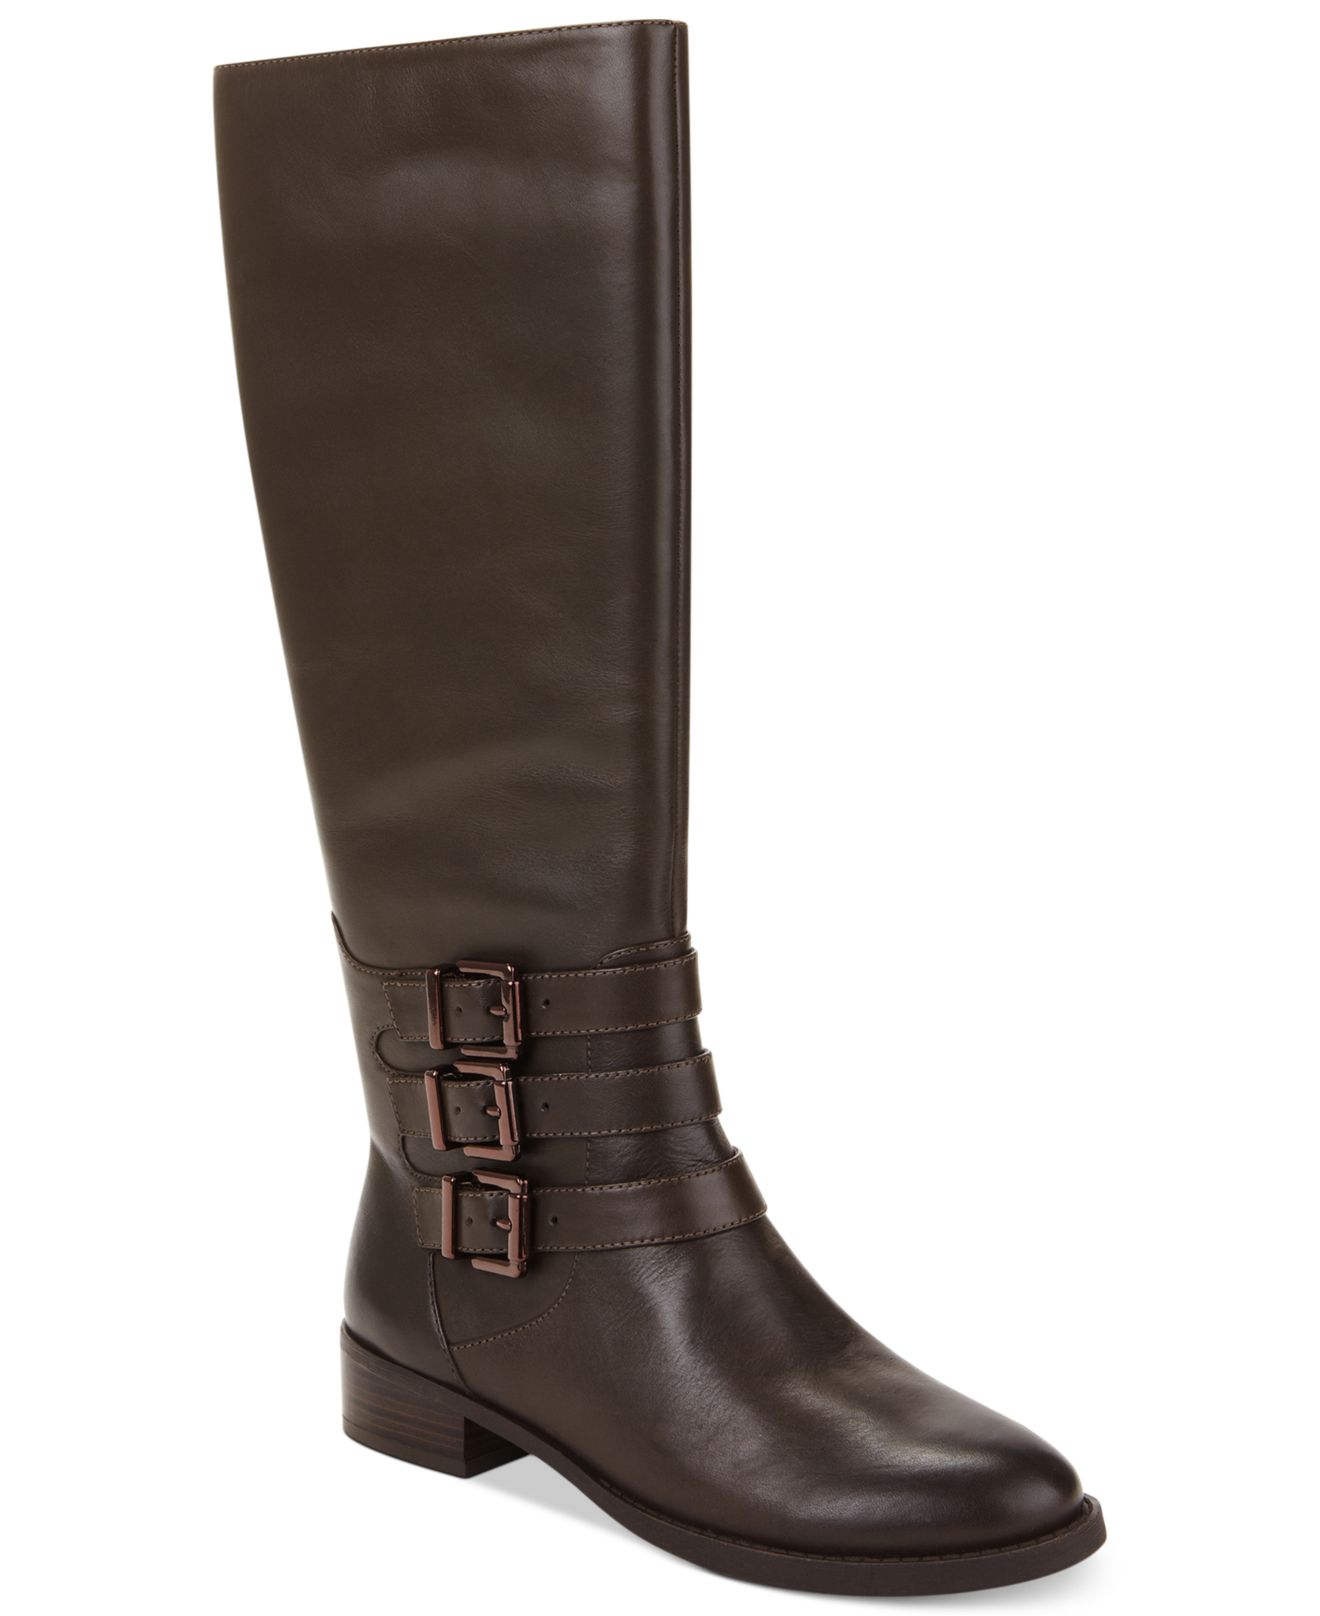 Lyst - Inc International Concepts Women'S Francy 3-Buckle Riding Boots ...